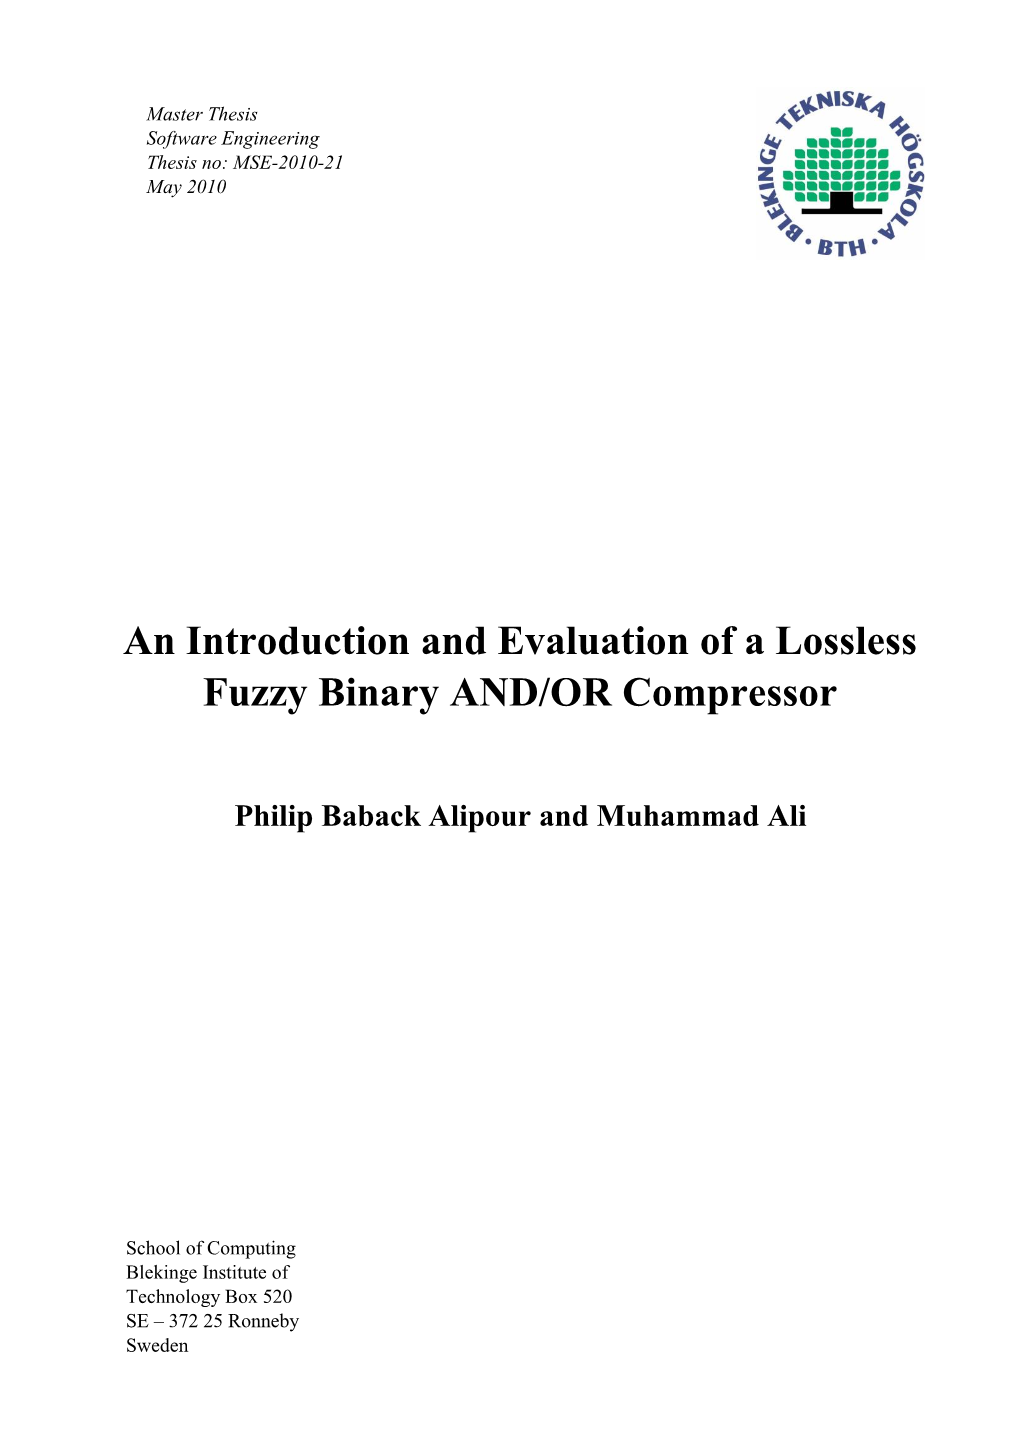 An Introduction and Evaluation of a Lossless Fuzzy Binary AND/OR Compressor